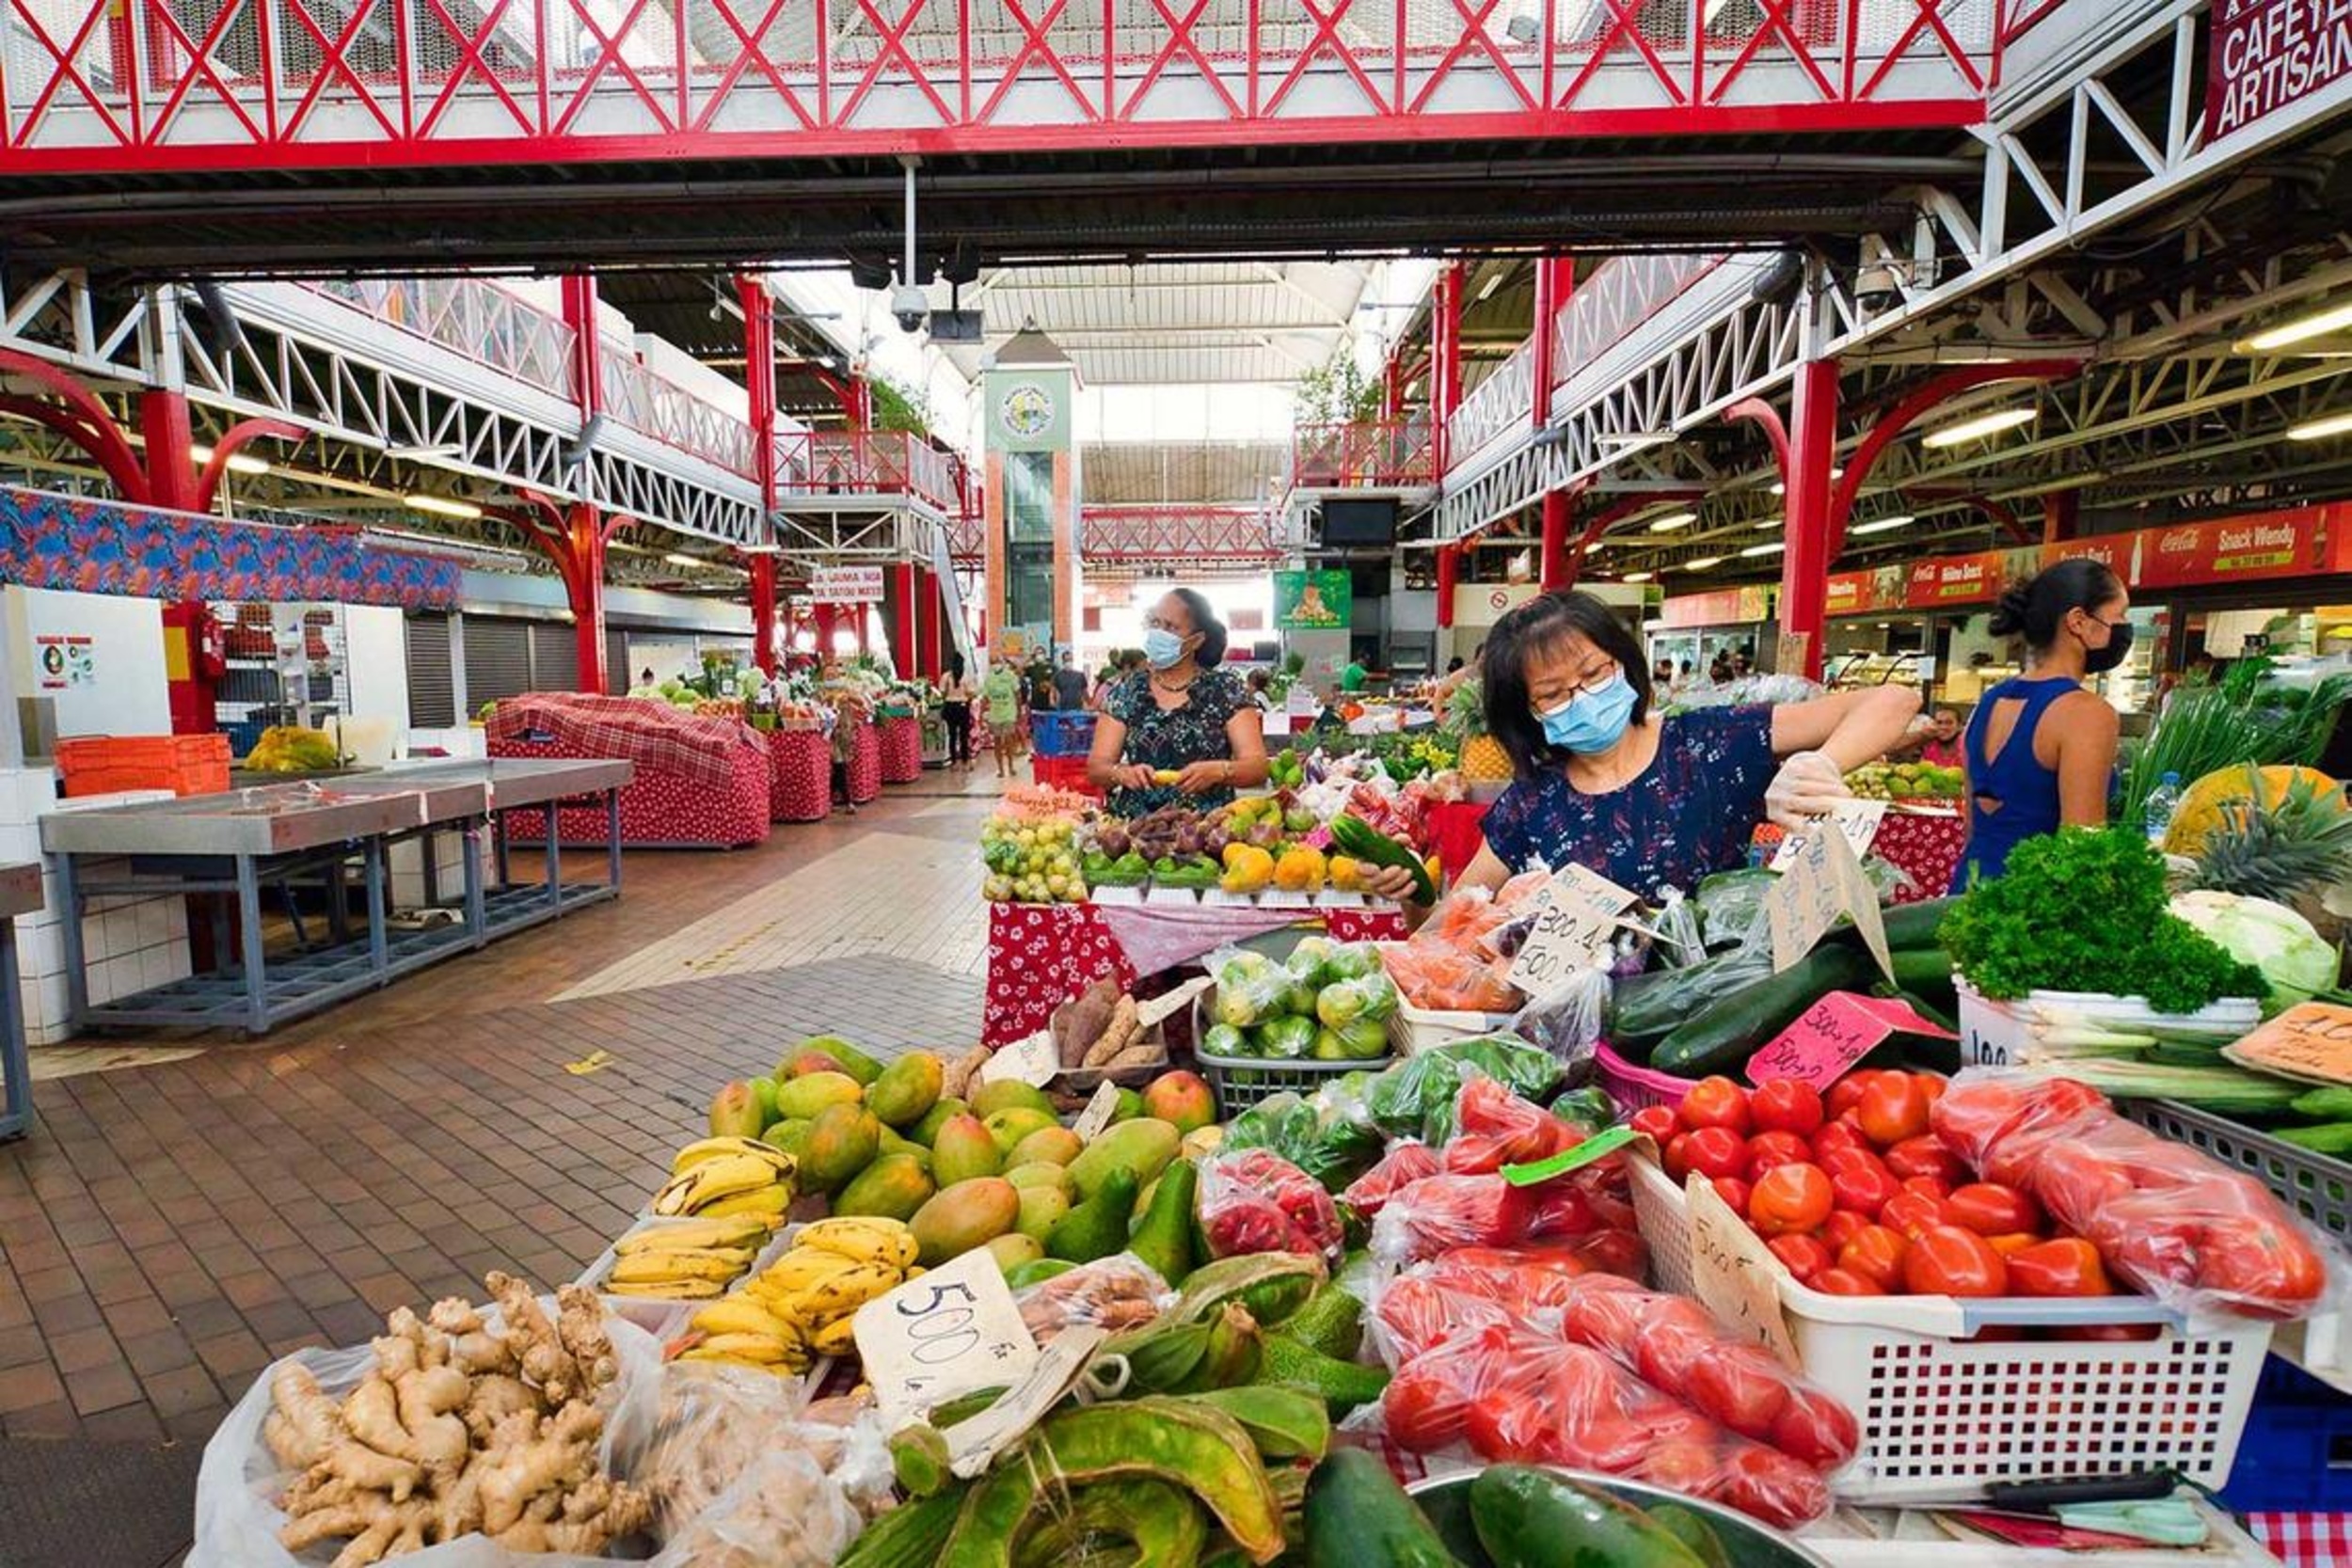 <p>This market is similar to one you might find in Europe. It spans multiple stories and is a maze of locally grown fruits, vegetables, meats, and pastries. I was reminded of a market in Italy, but the Papetee market has many more coconuts.</p><p>You may also like: <a href='https://www.yardbarker.com/lifestyle/articles/our_25_favorite_fair_foods_of_all_time_041224/s1__24412345'>Our 25 favorite fair foods of all time</a></p>